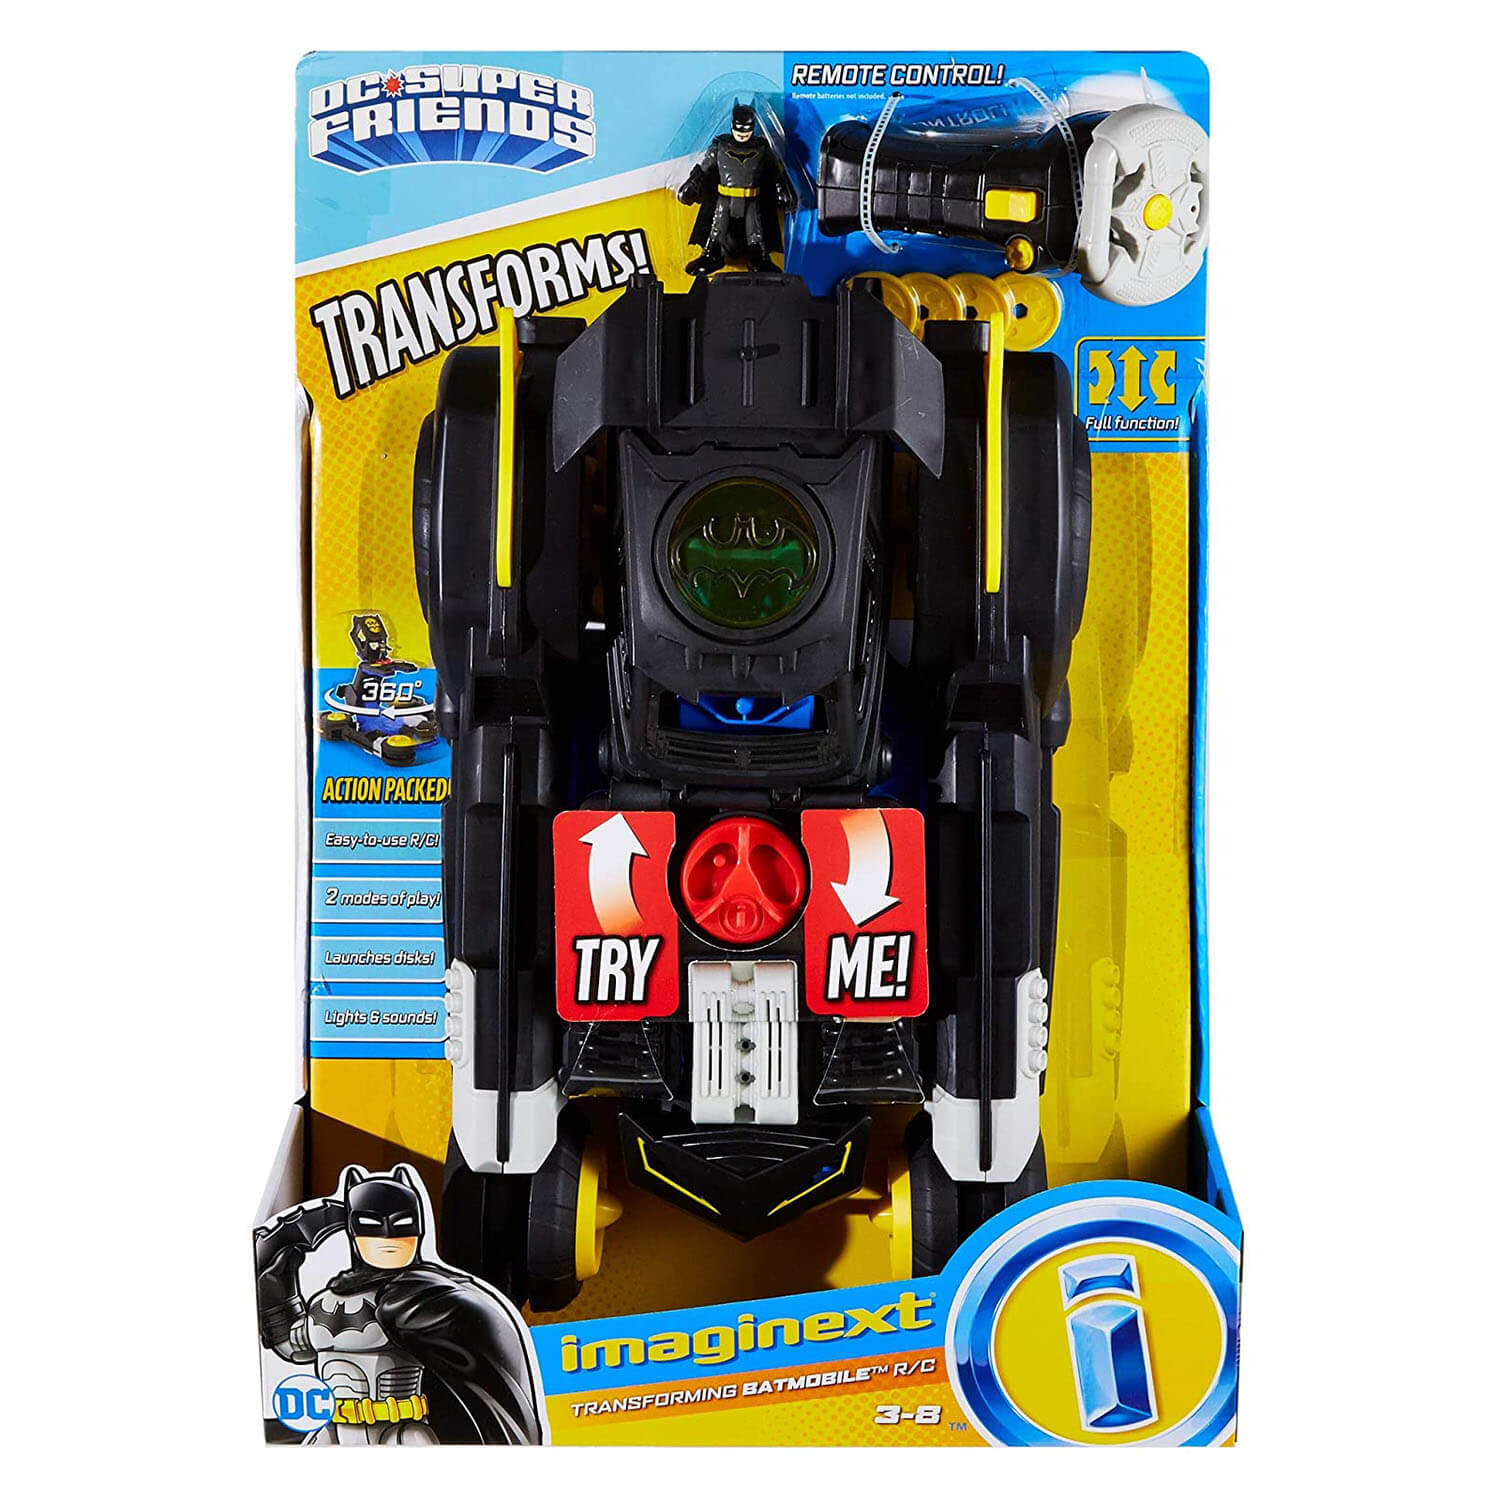 Front view of the Imaginext Transforming Remote Control Batmobile packaging.